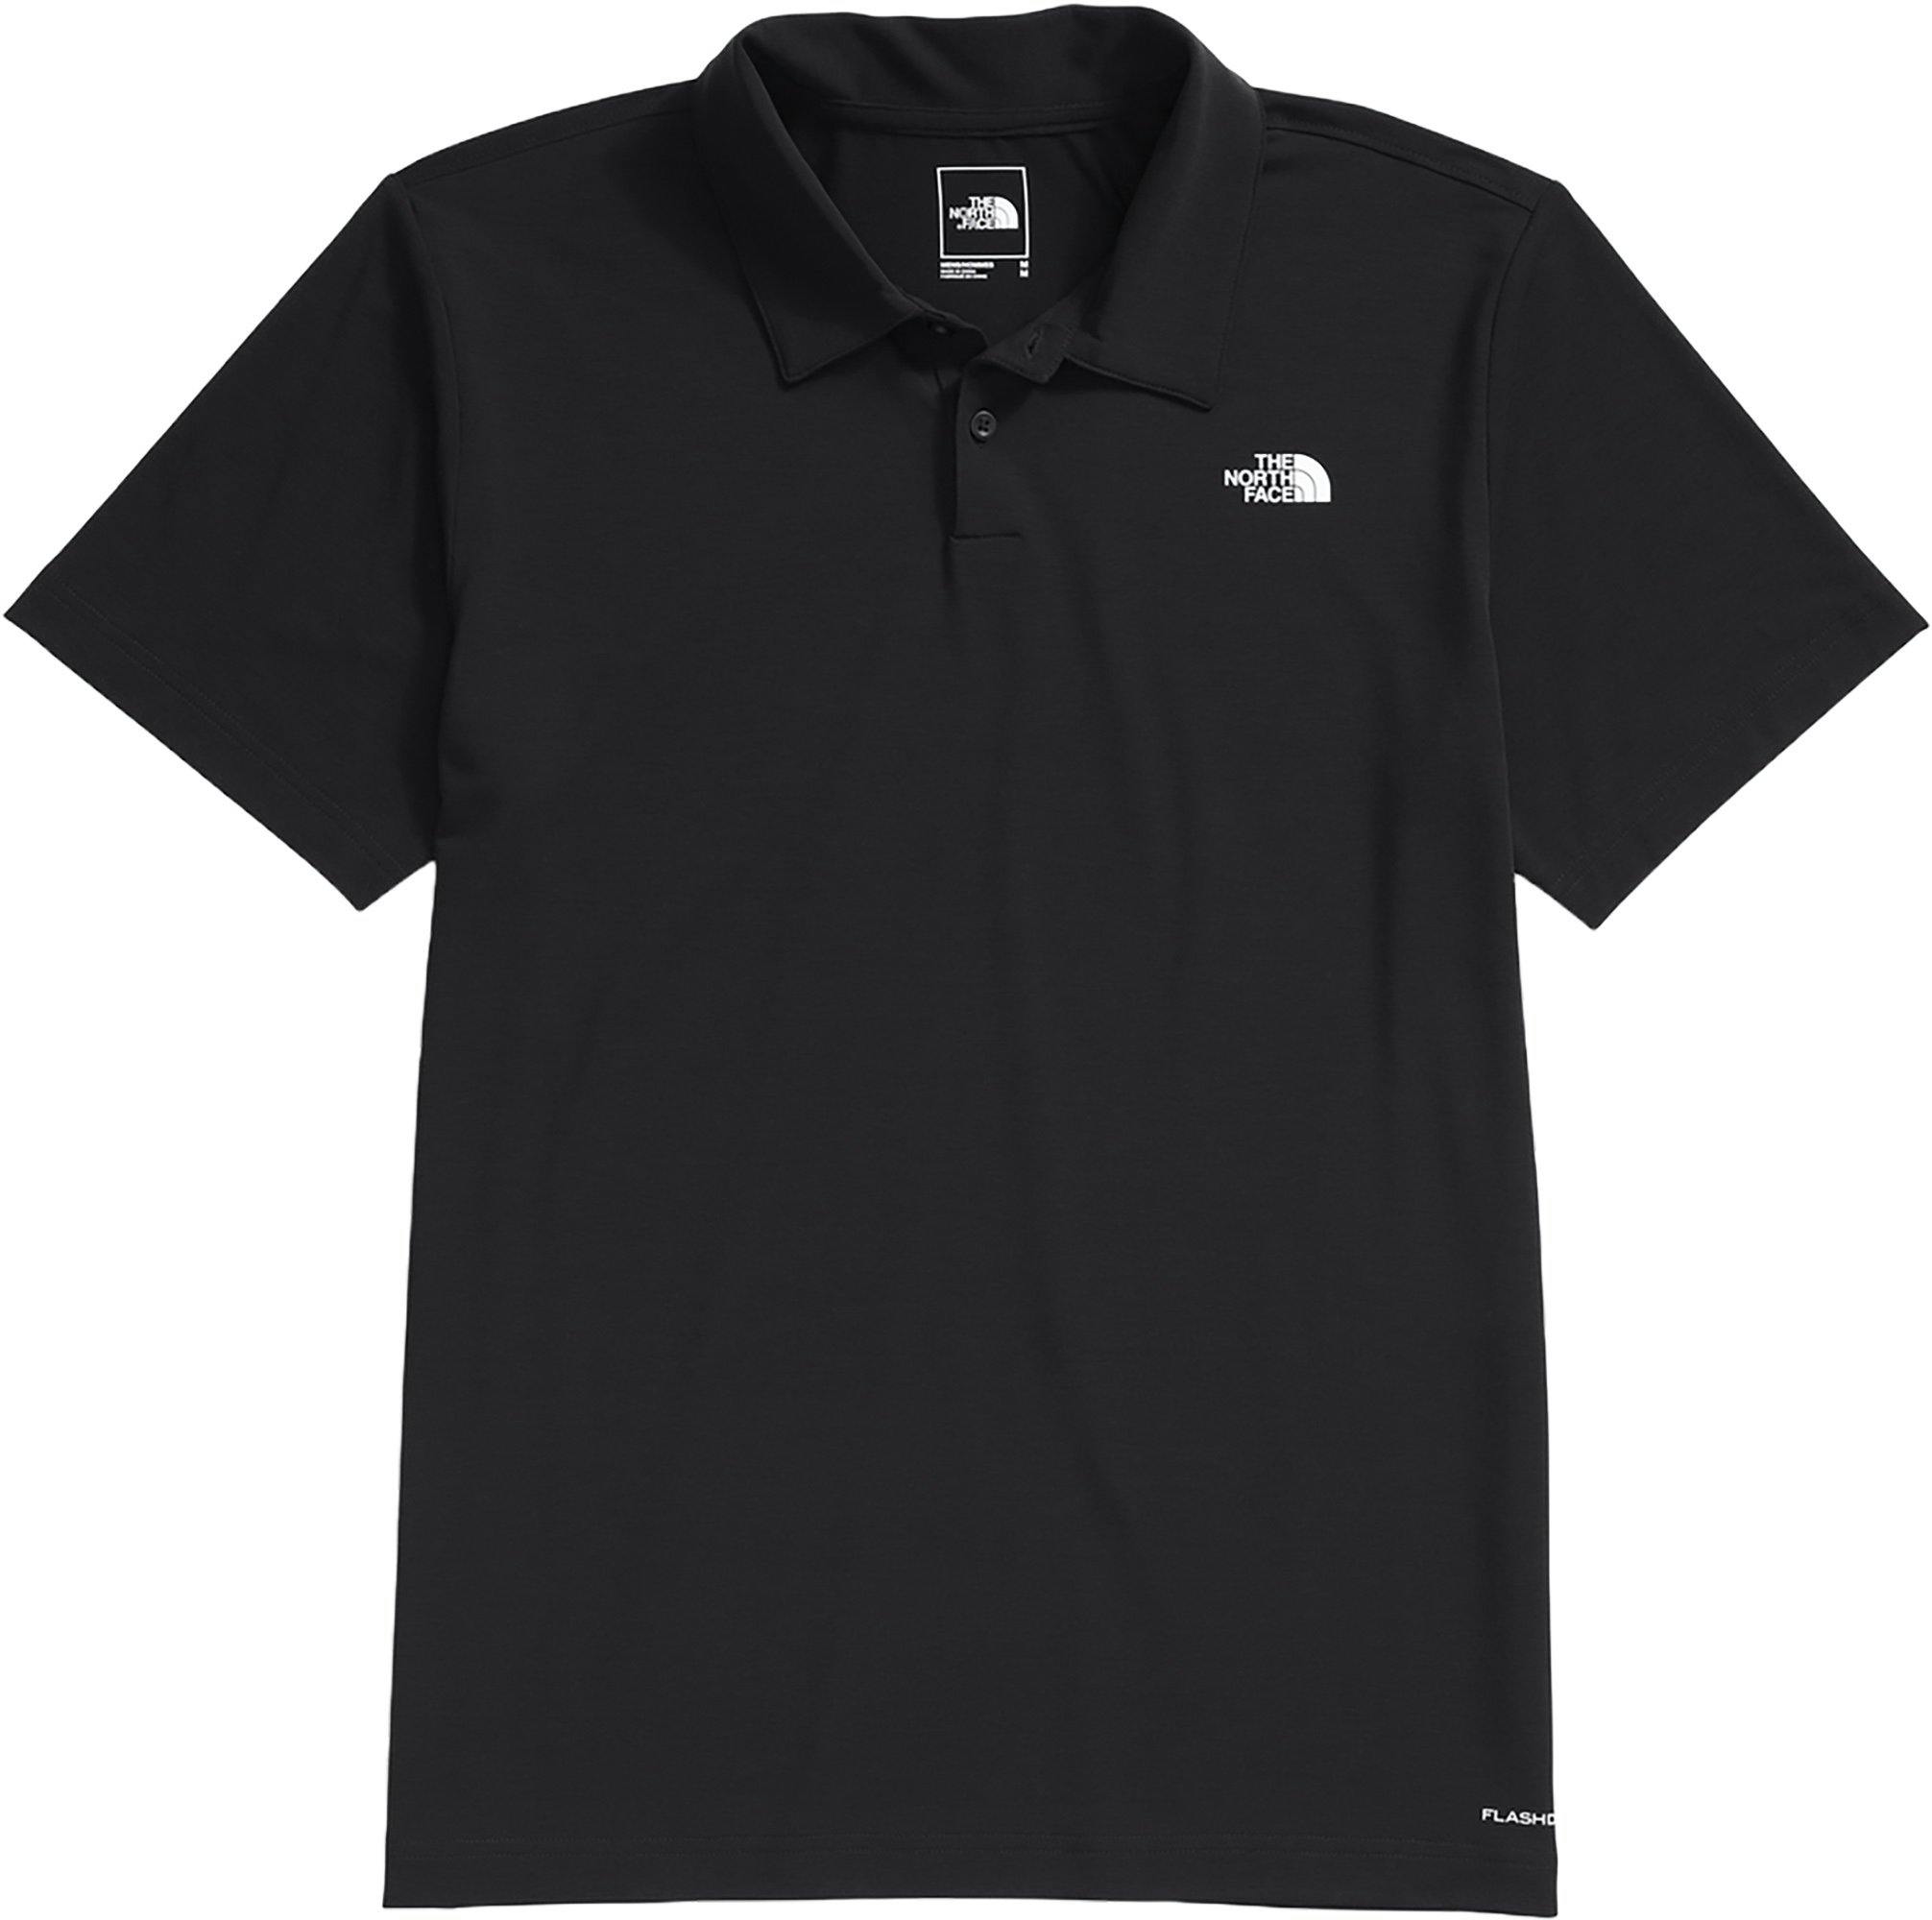 Product image for Adventure Polo - Men's